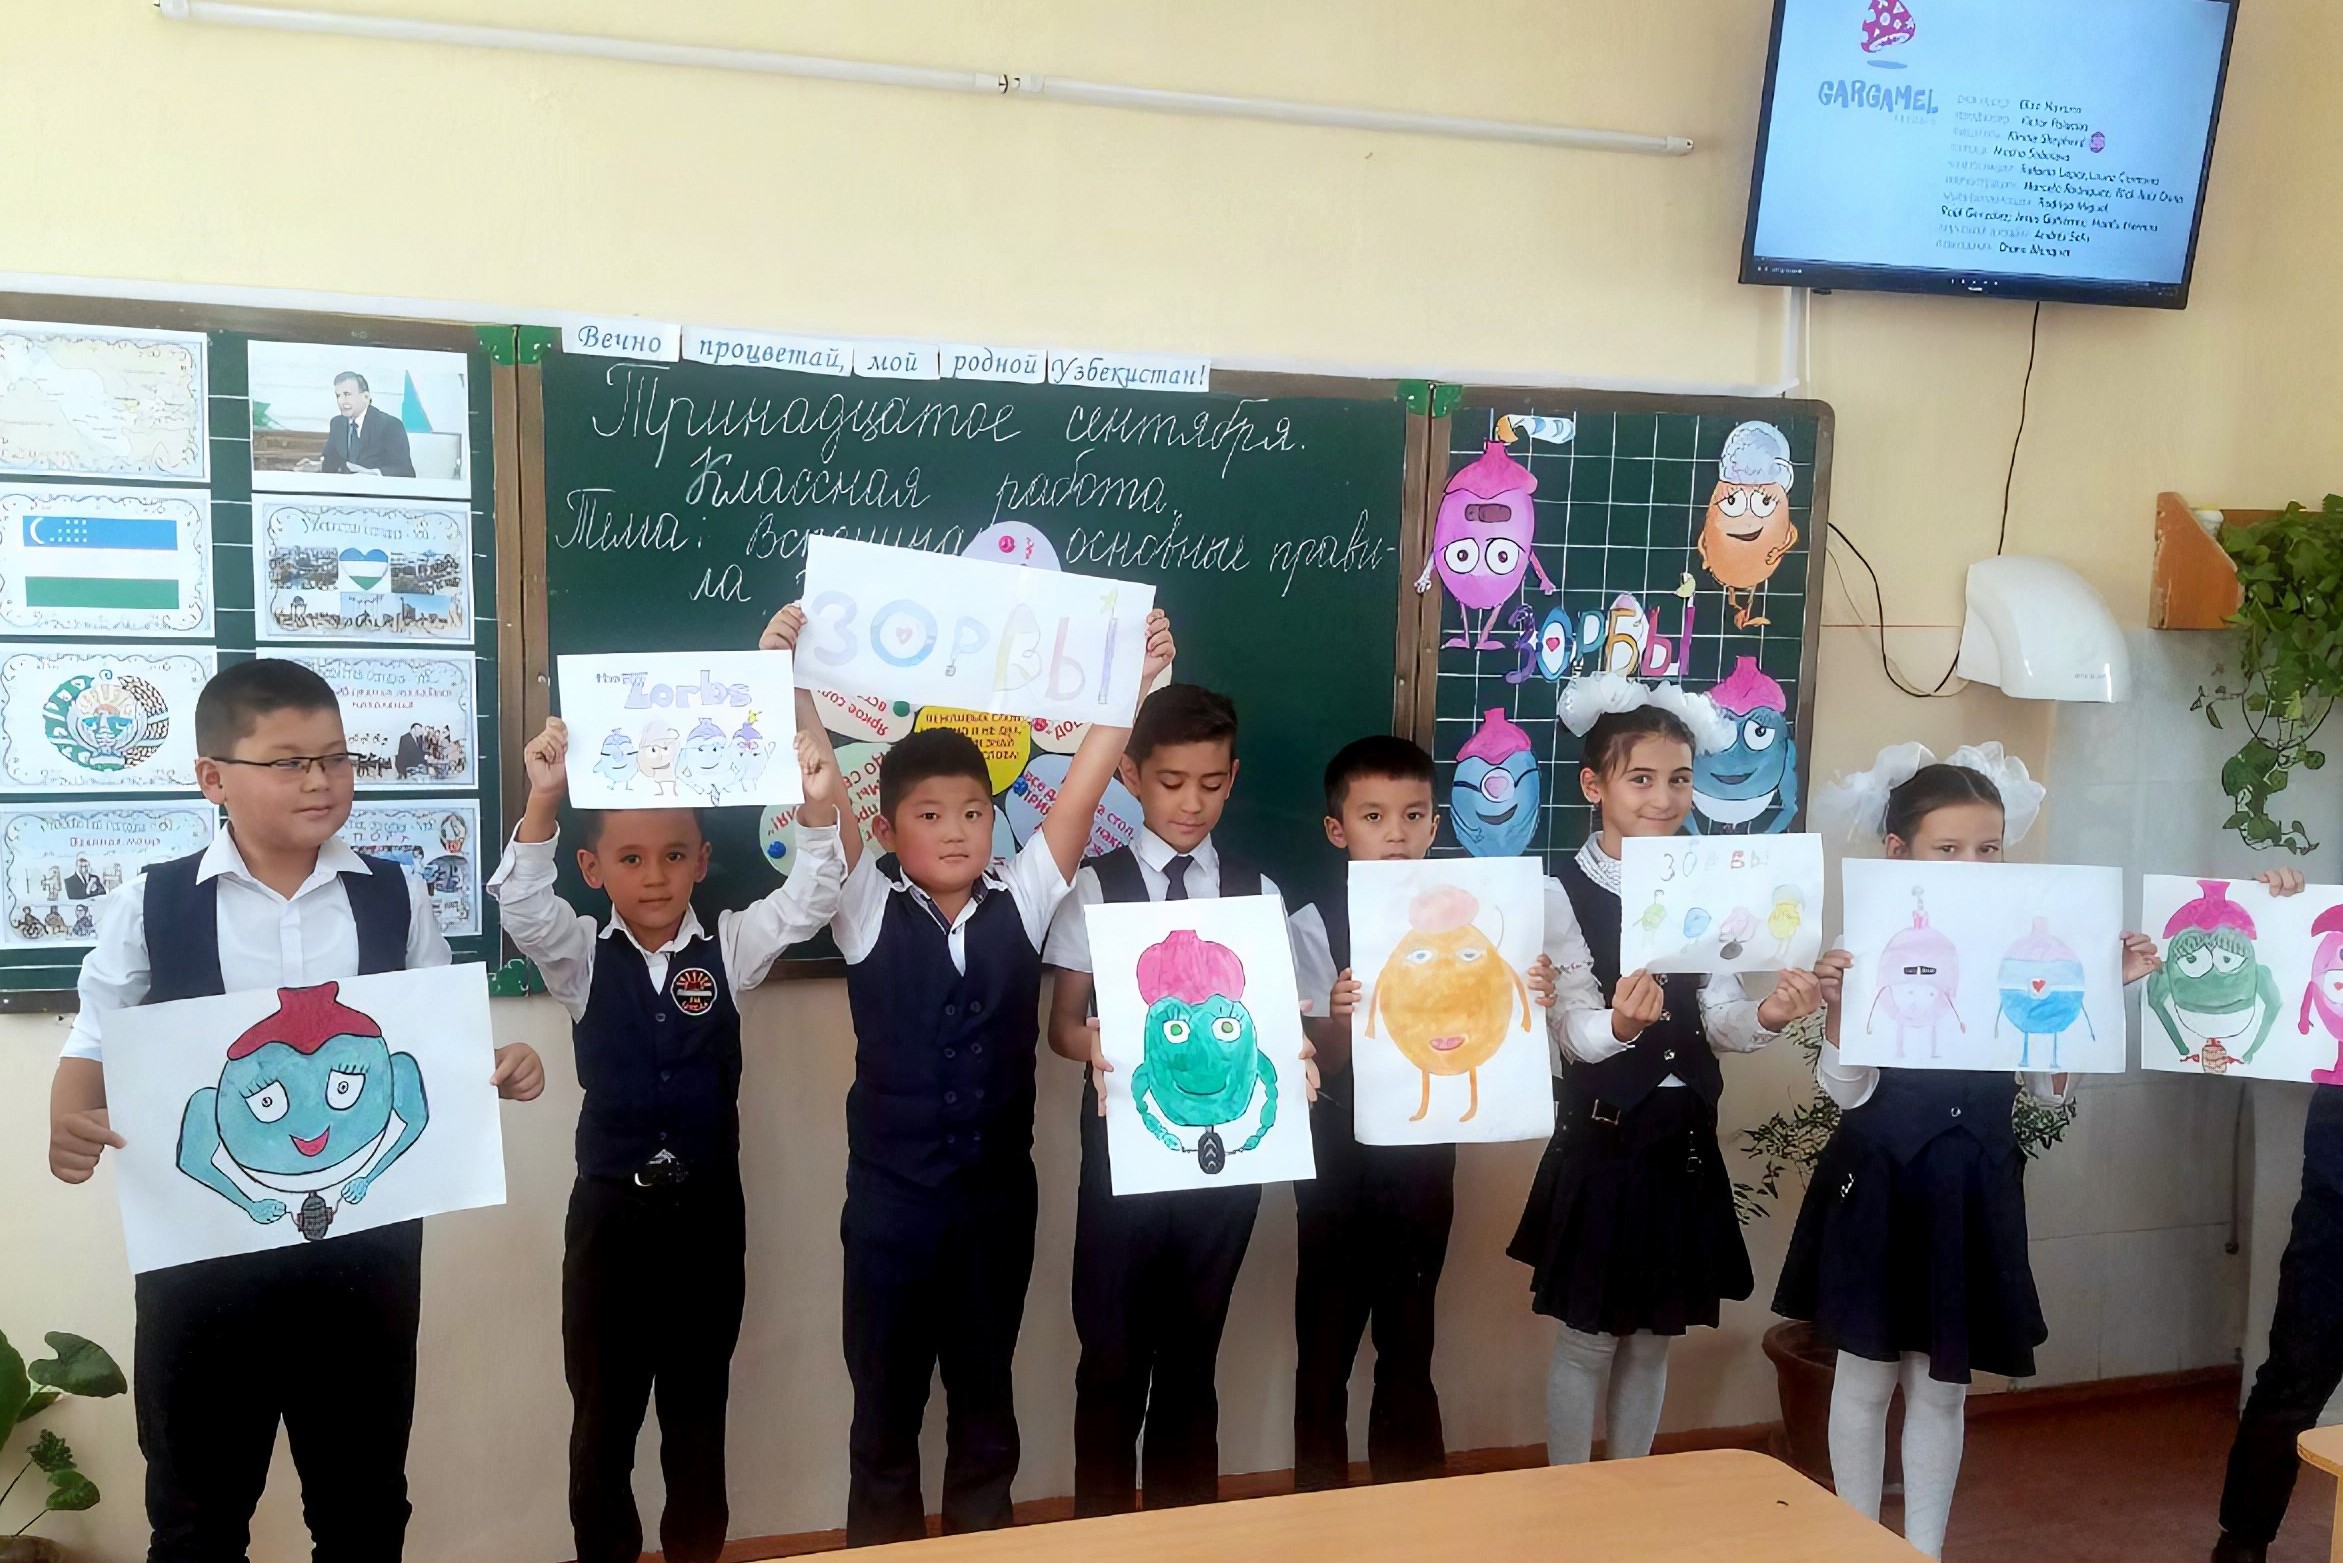 E4Js Zorbs are part of the primary curricula in Uzbekistan